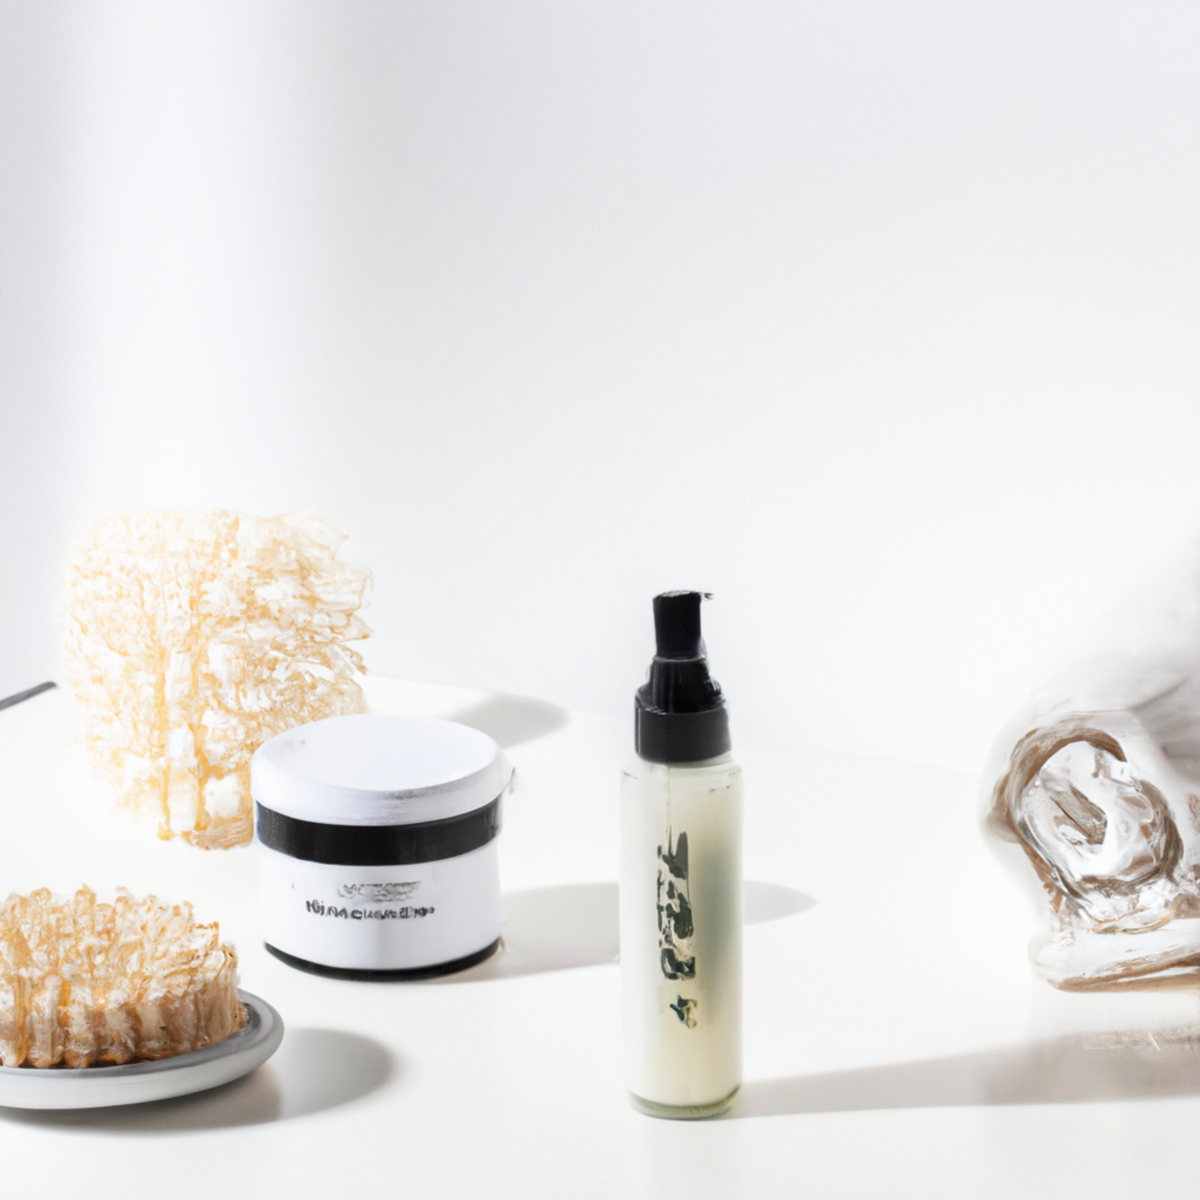 Unleash the power of nature with these indulgent natural skin care routines, featuring CBD-infused body lotion, exfoliating scrub, and a fluffy towel for the ultimate self-care experience.